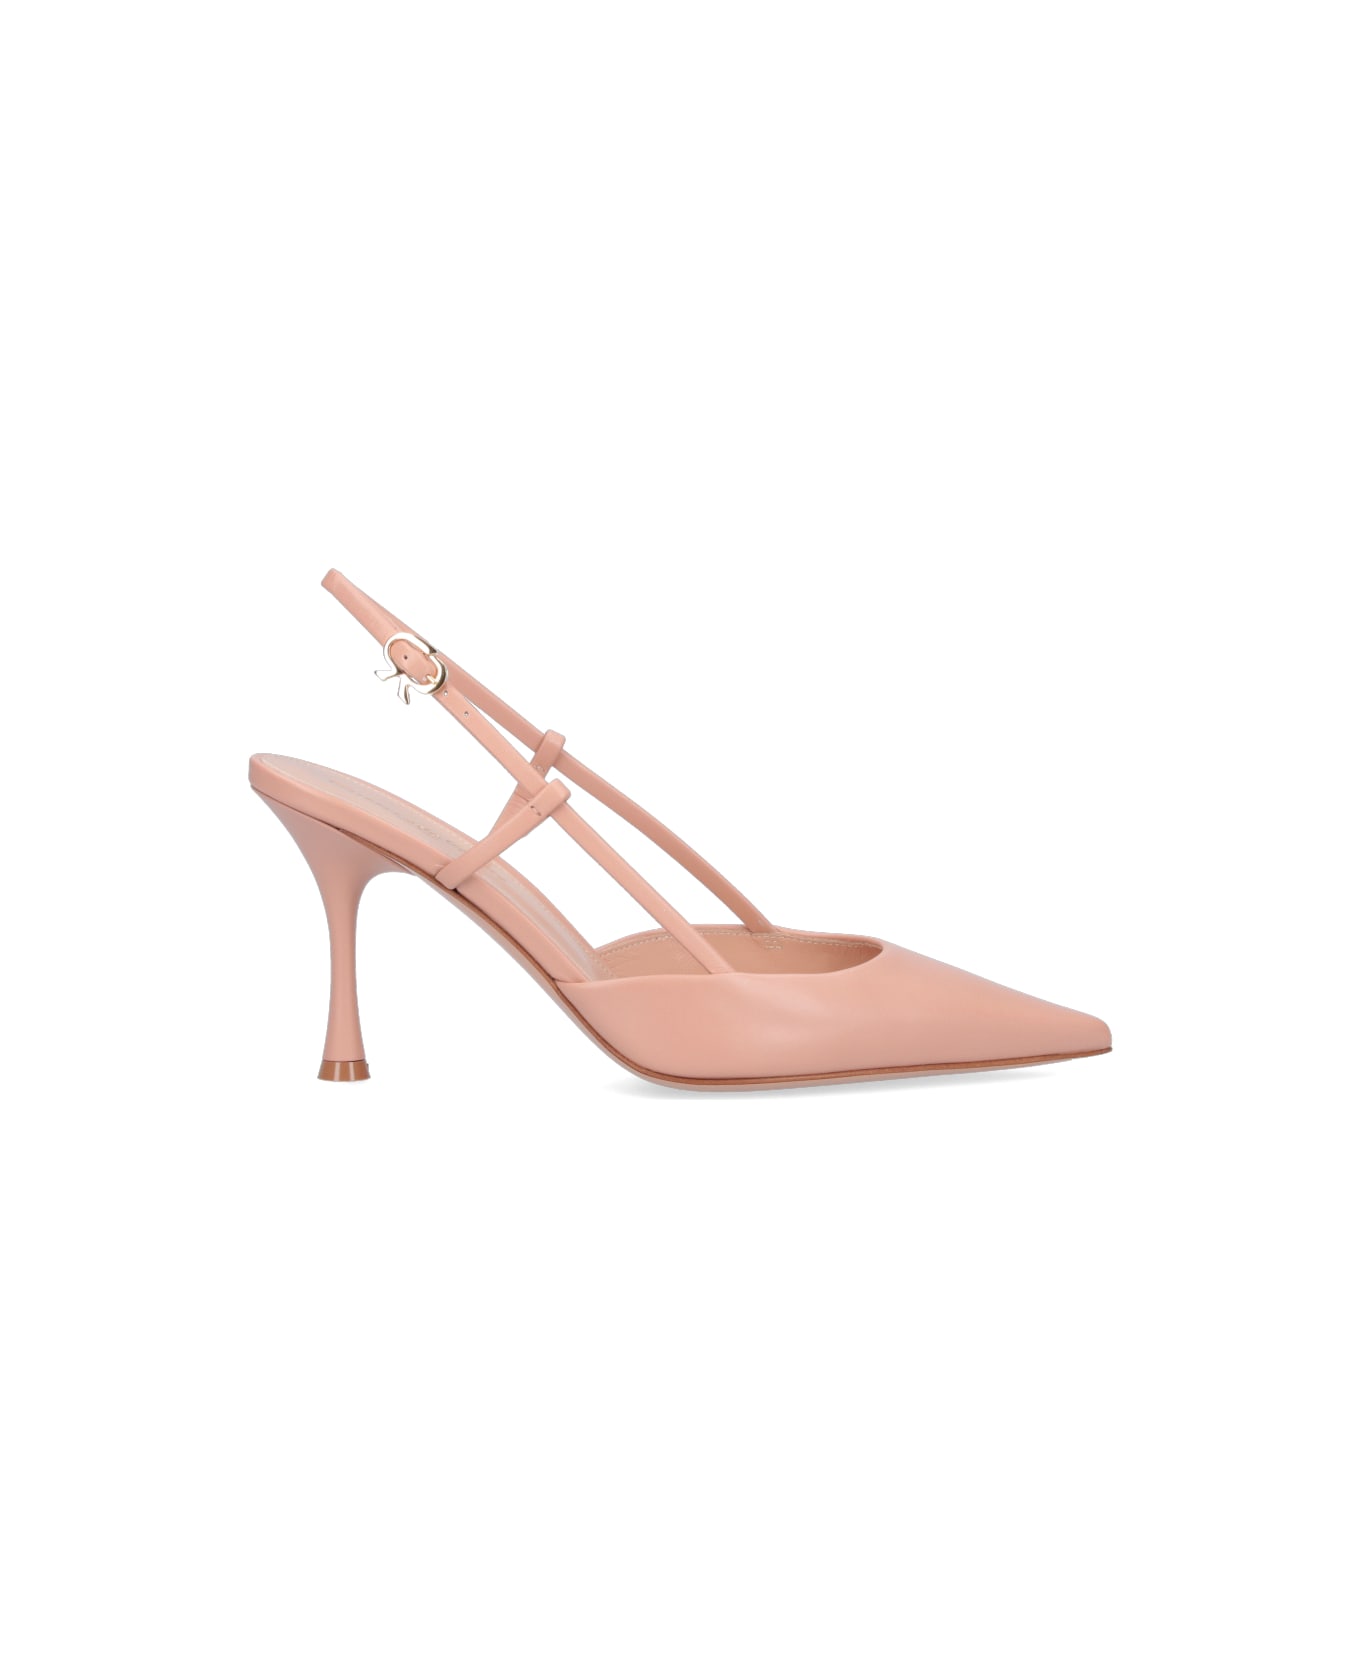 Gianvito Rossi Ascent Slingbacks - Pink